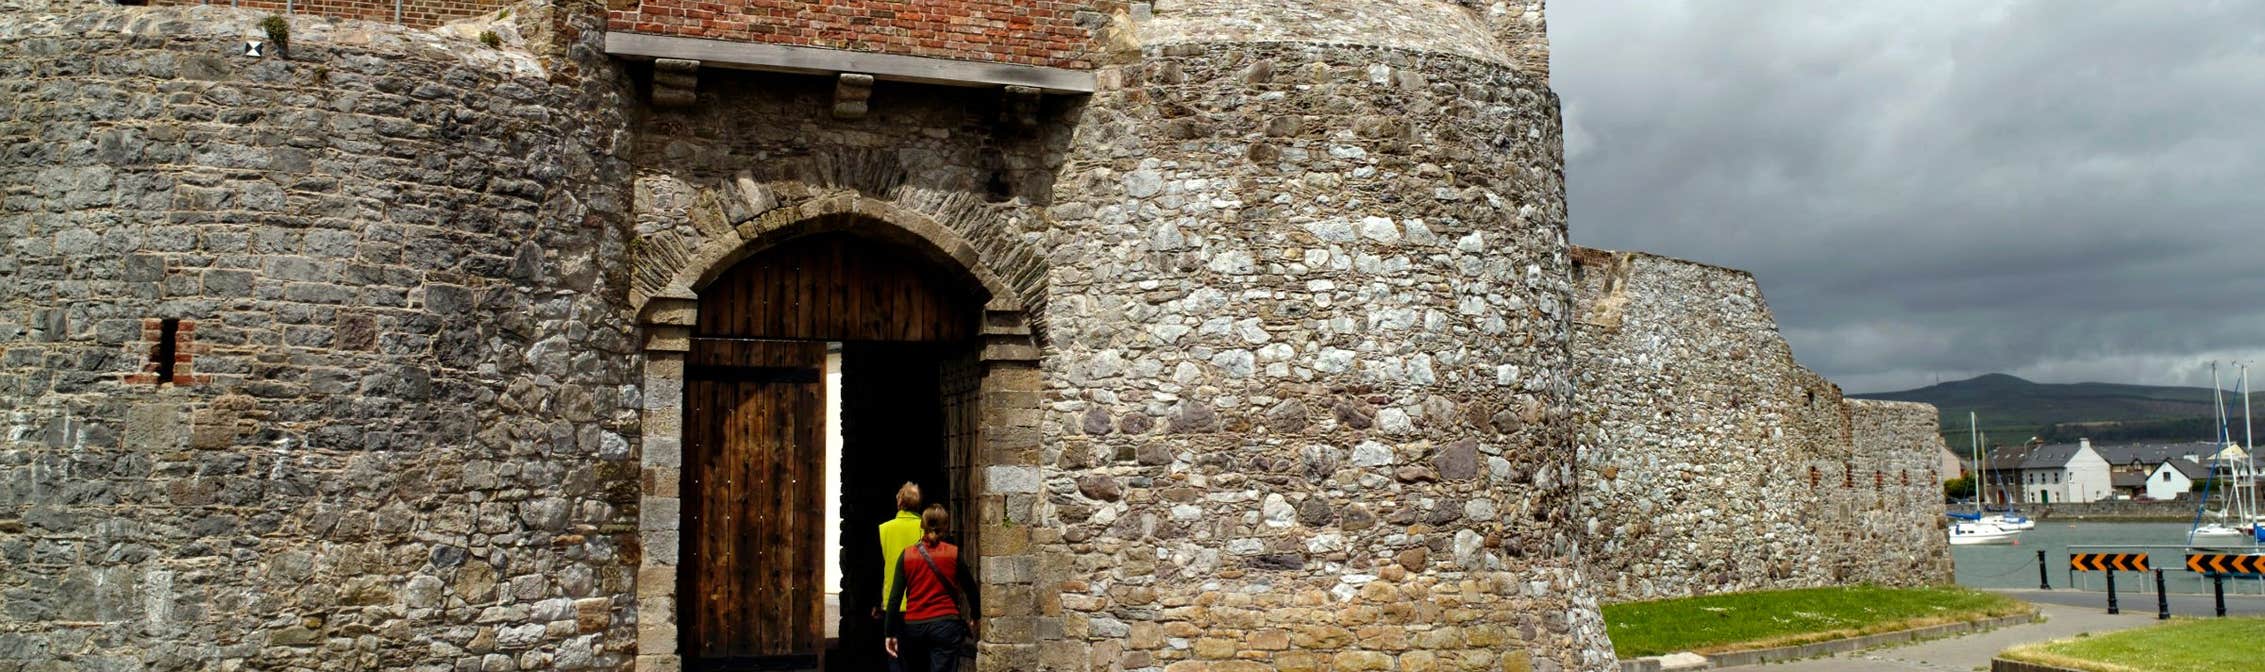 Image of visitors entering Dungarvan Castle, County Waterford